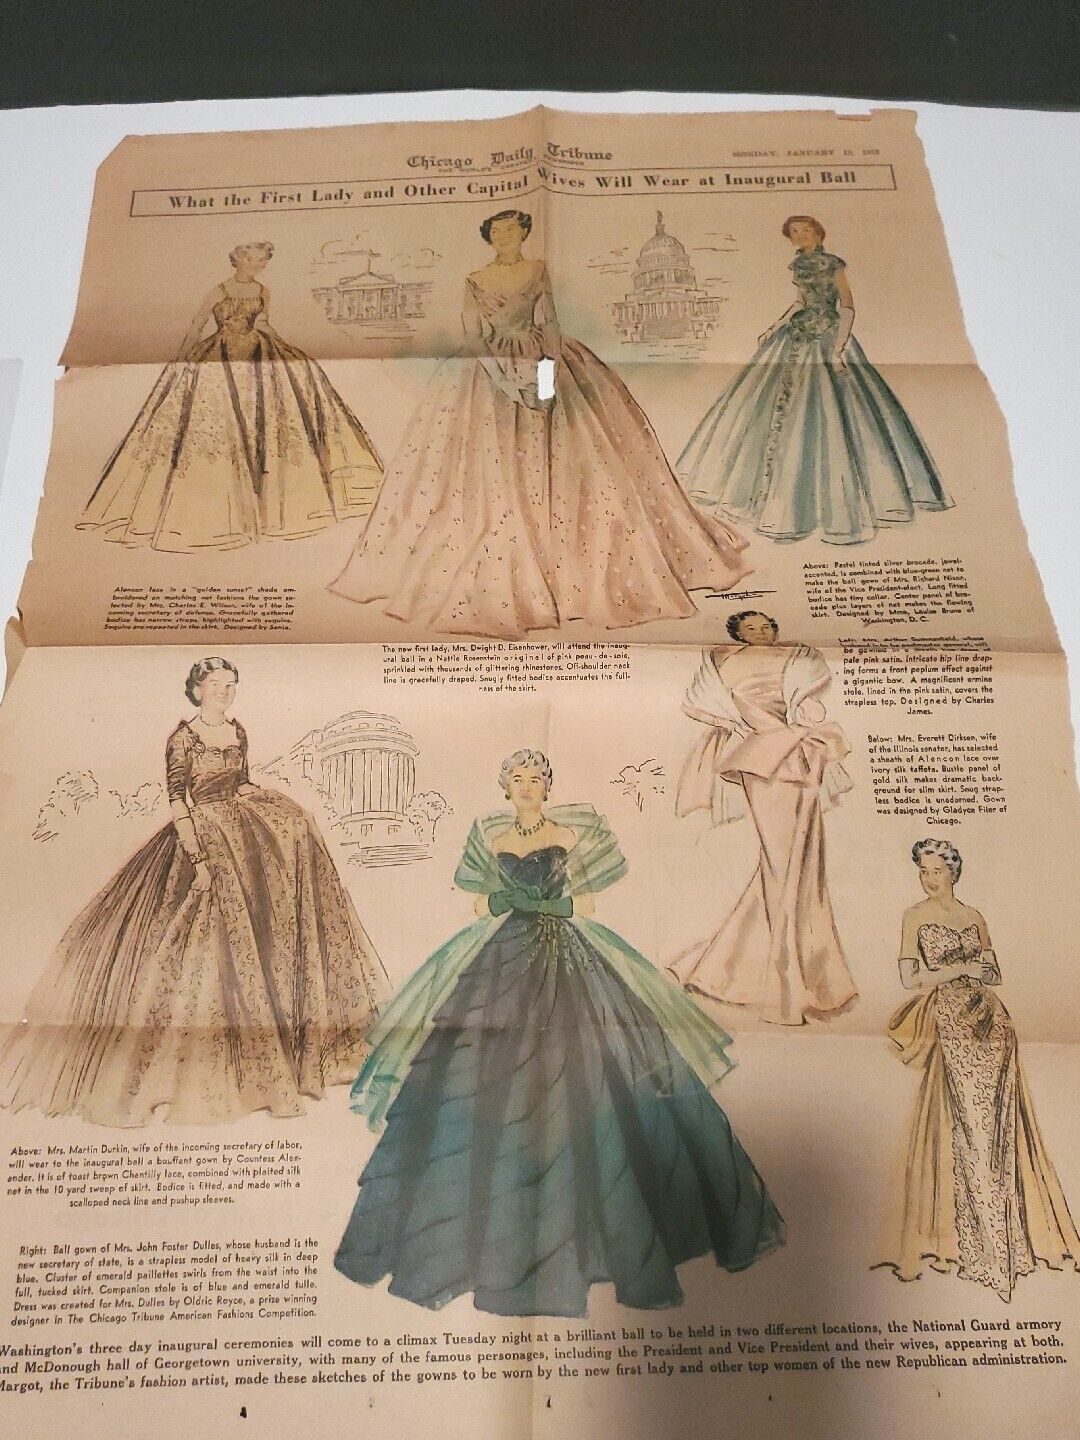 1953 Chicago Tribune What the First Lady And Other Capital Wives Will Wear 